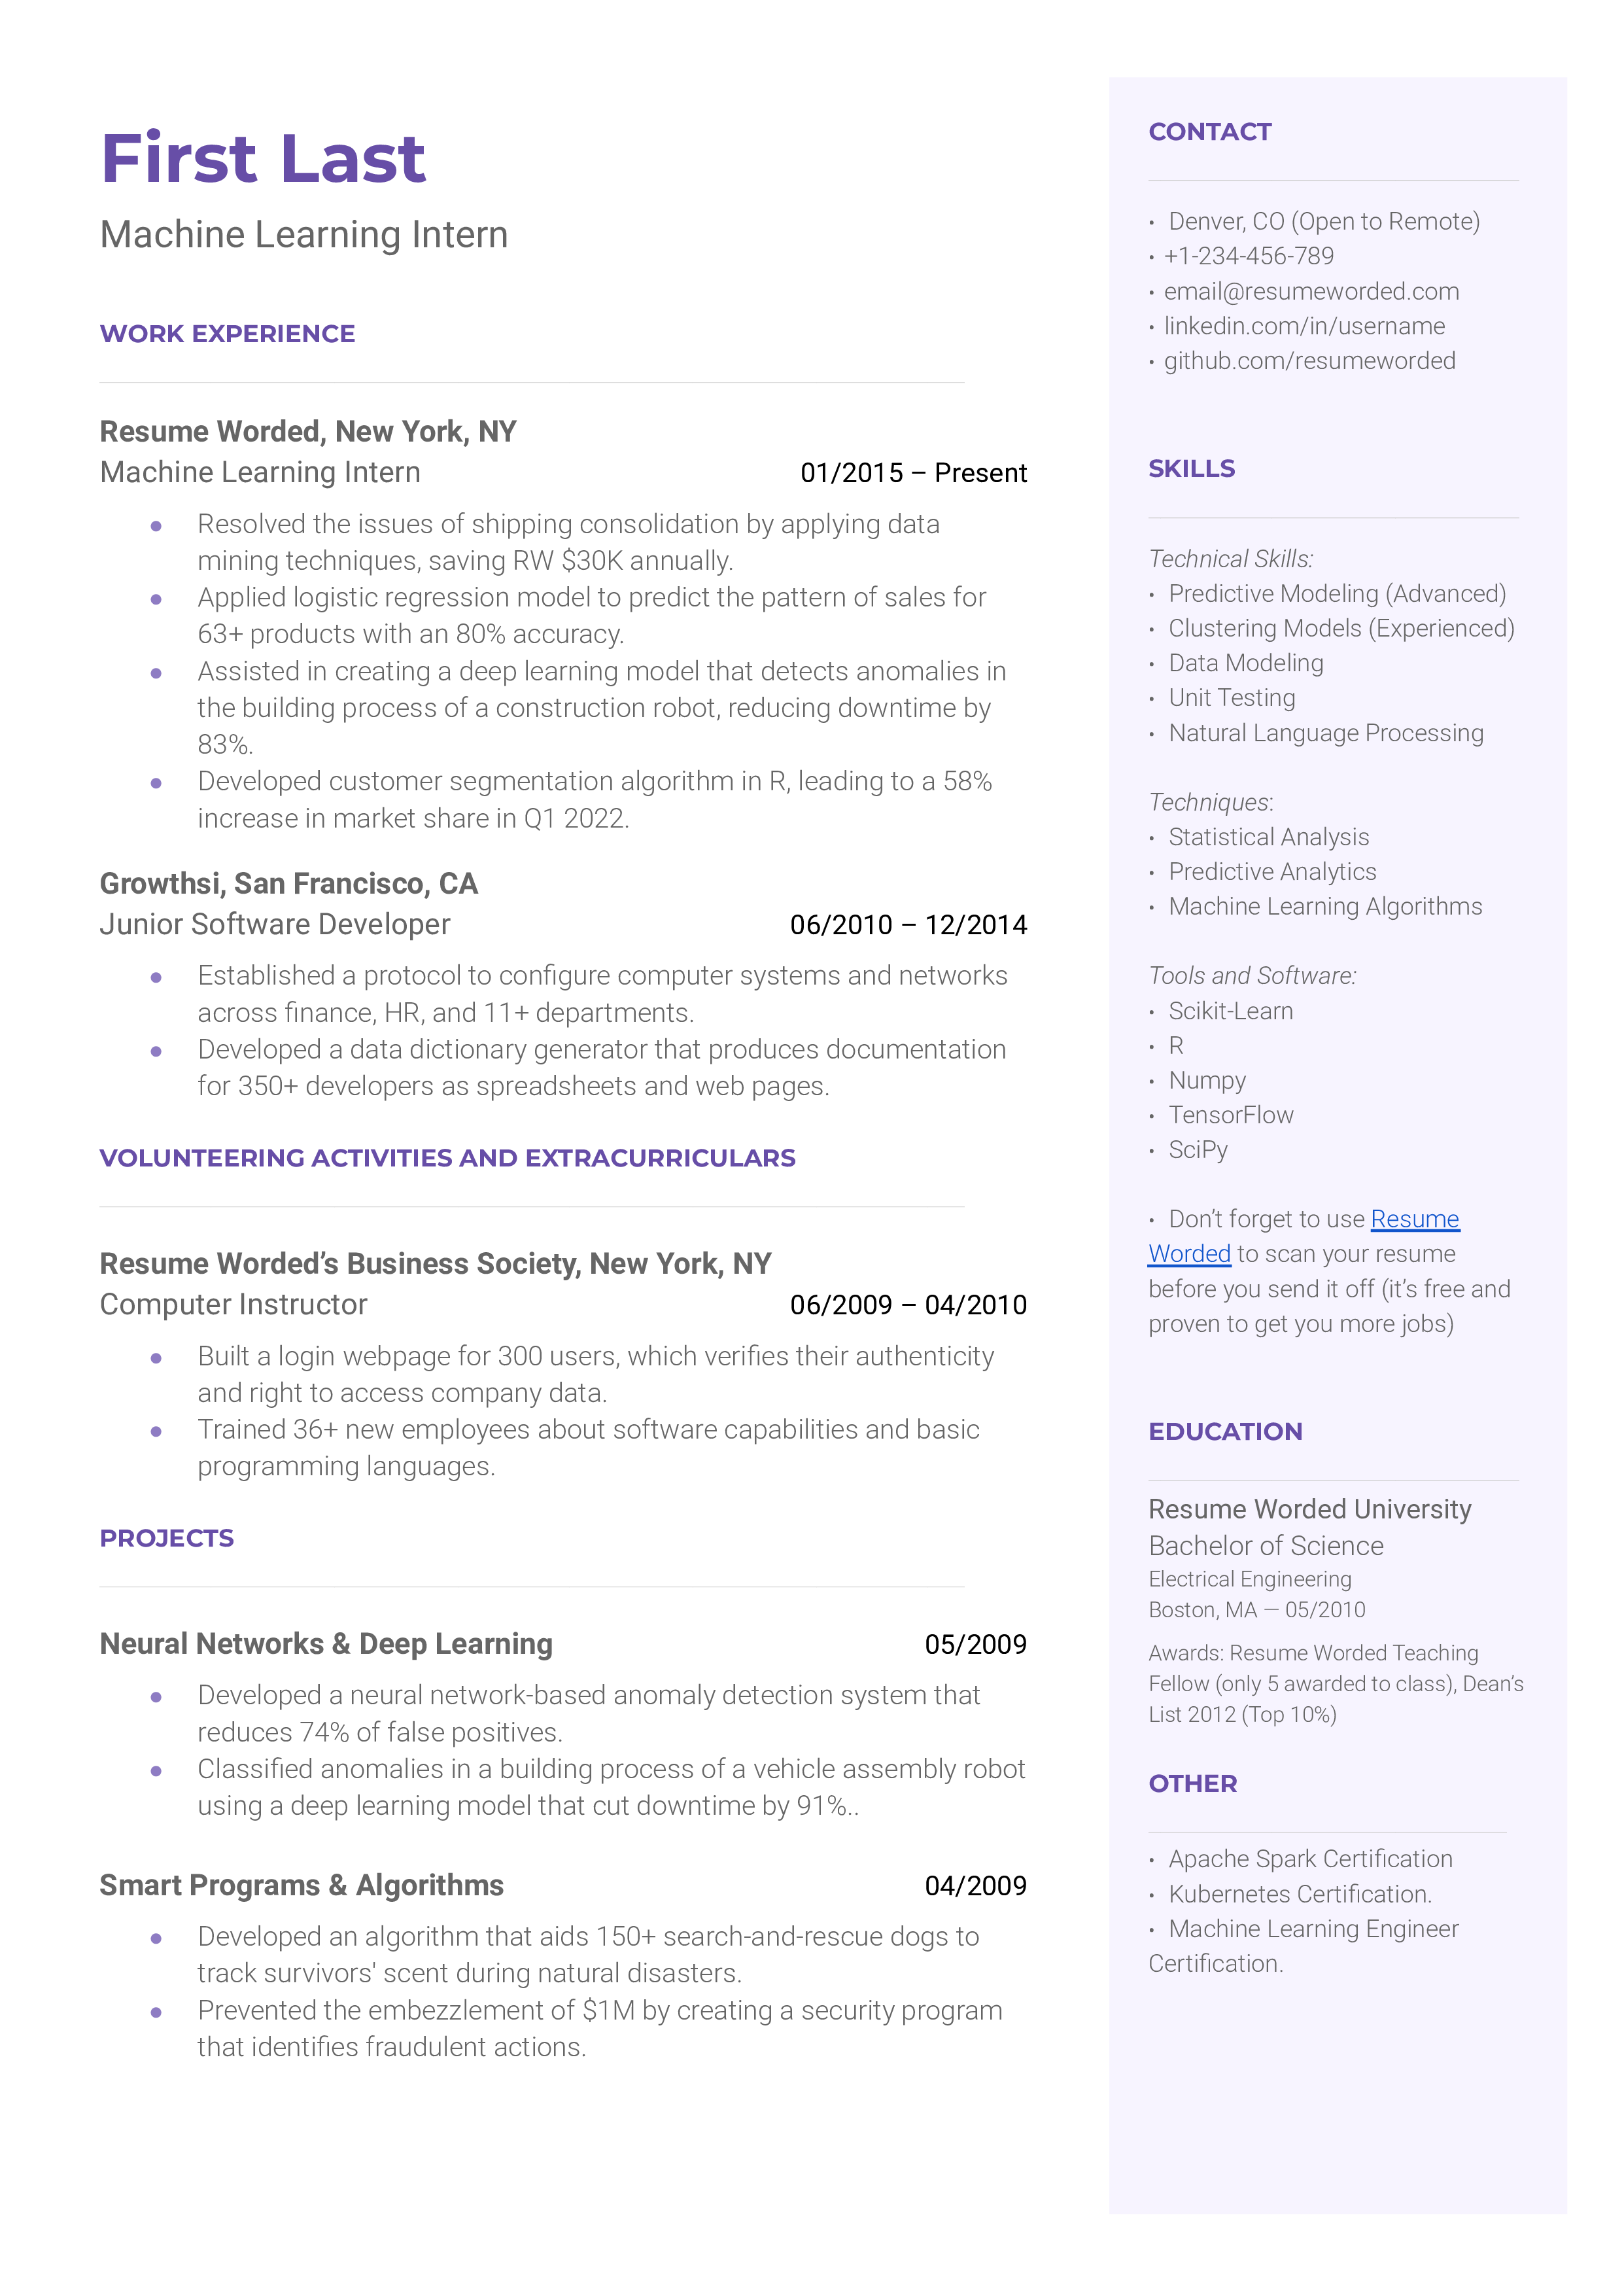 A machine learning intern resume template including volunteering experience.